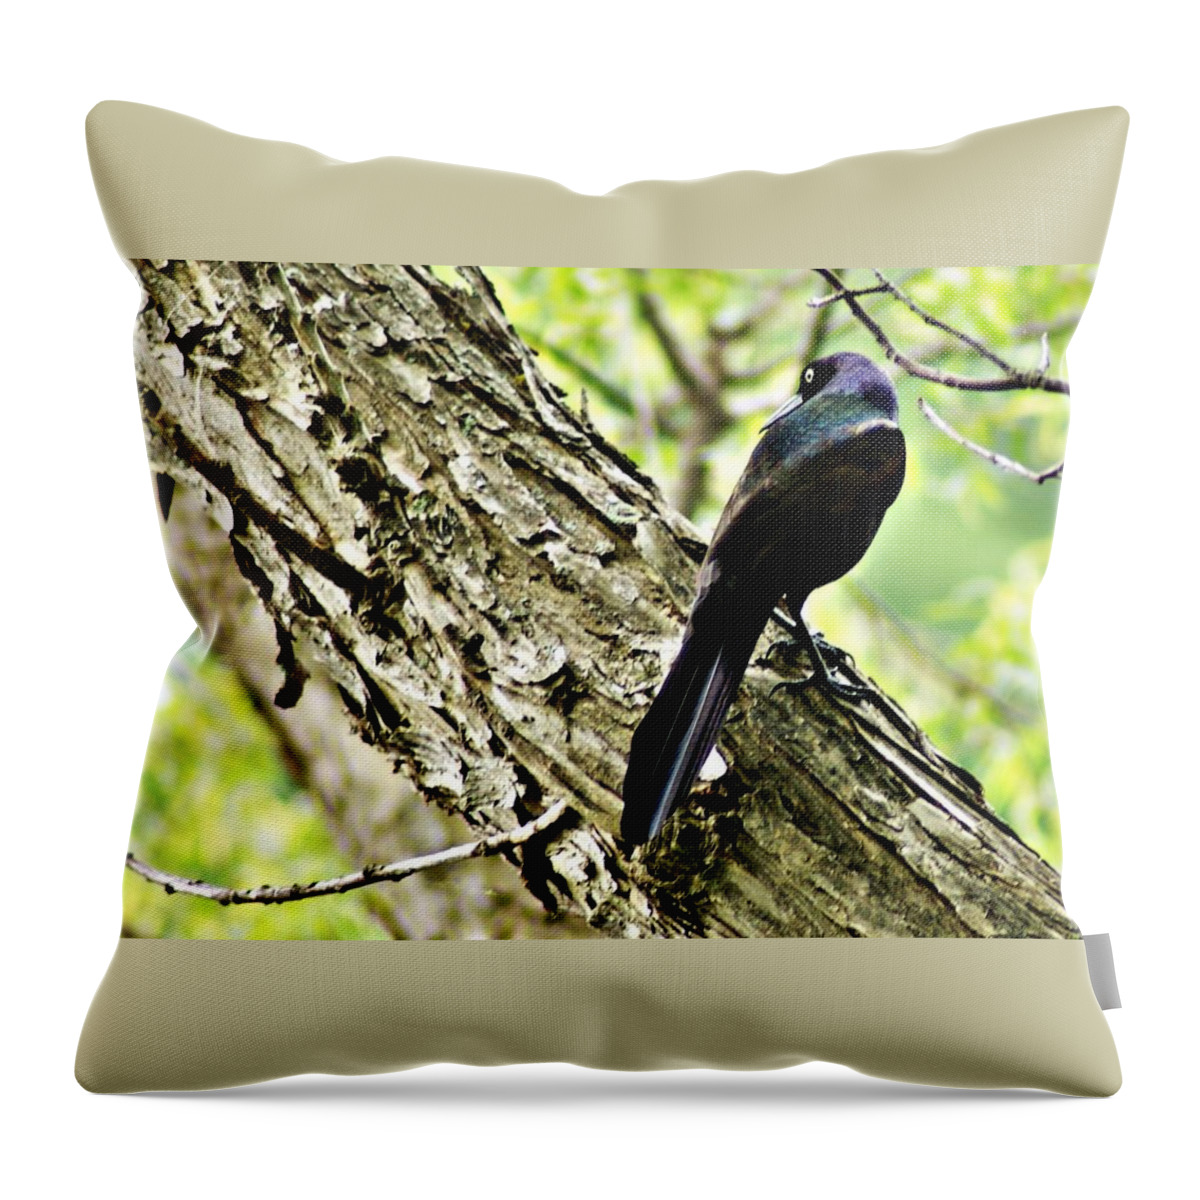 Grackle Throw Pillow featuring the photograph Grackle 1 by Joe Faherty